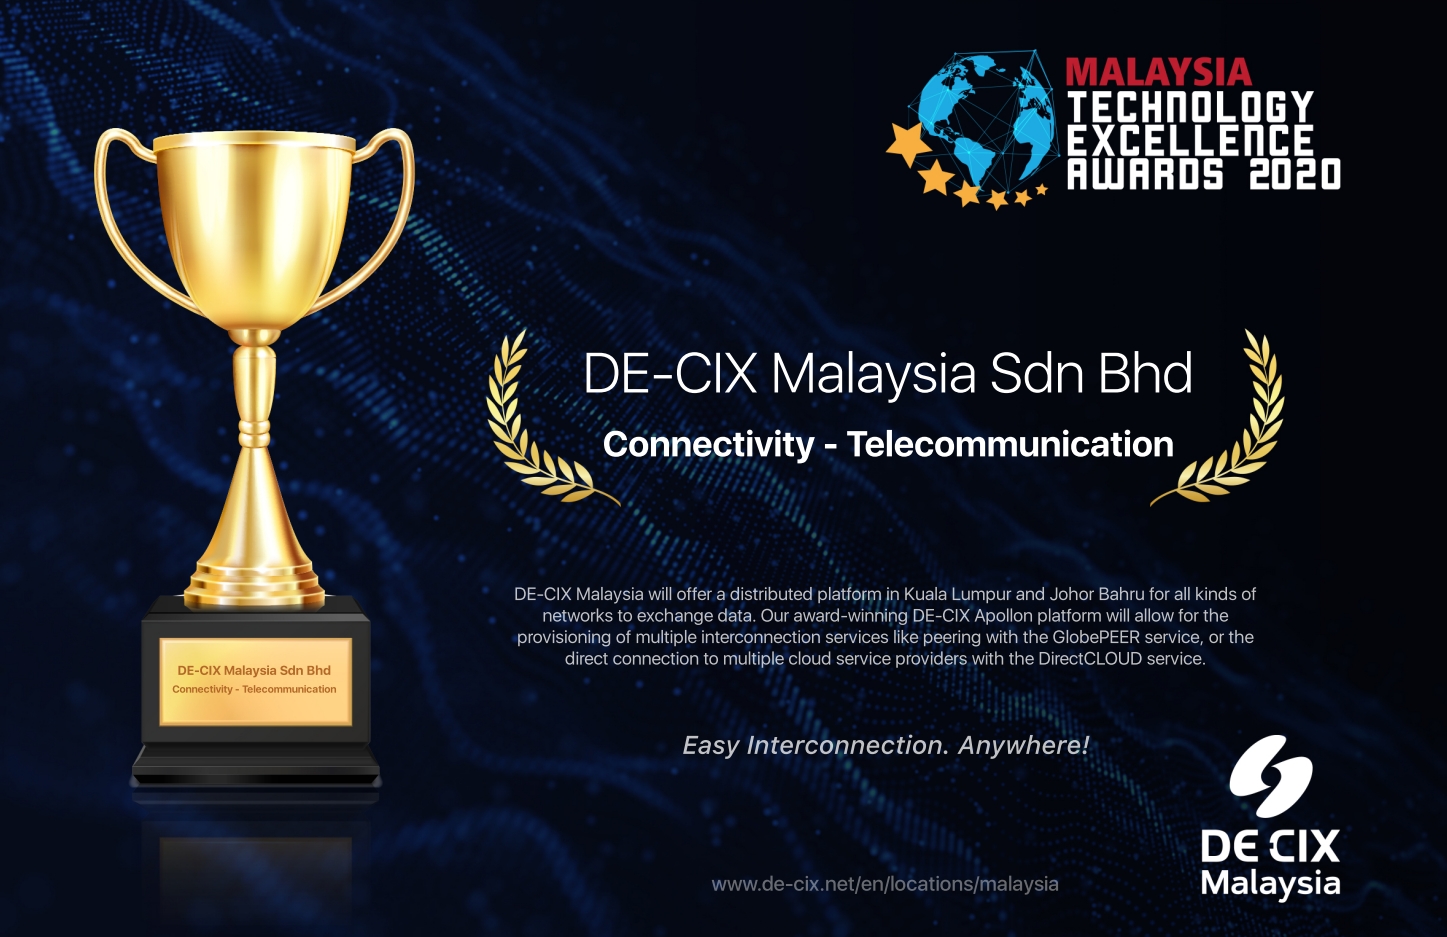 Malaysia Technology Excellence Awards 2020